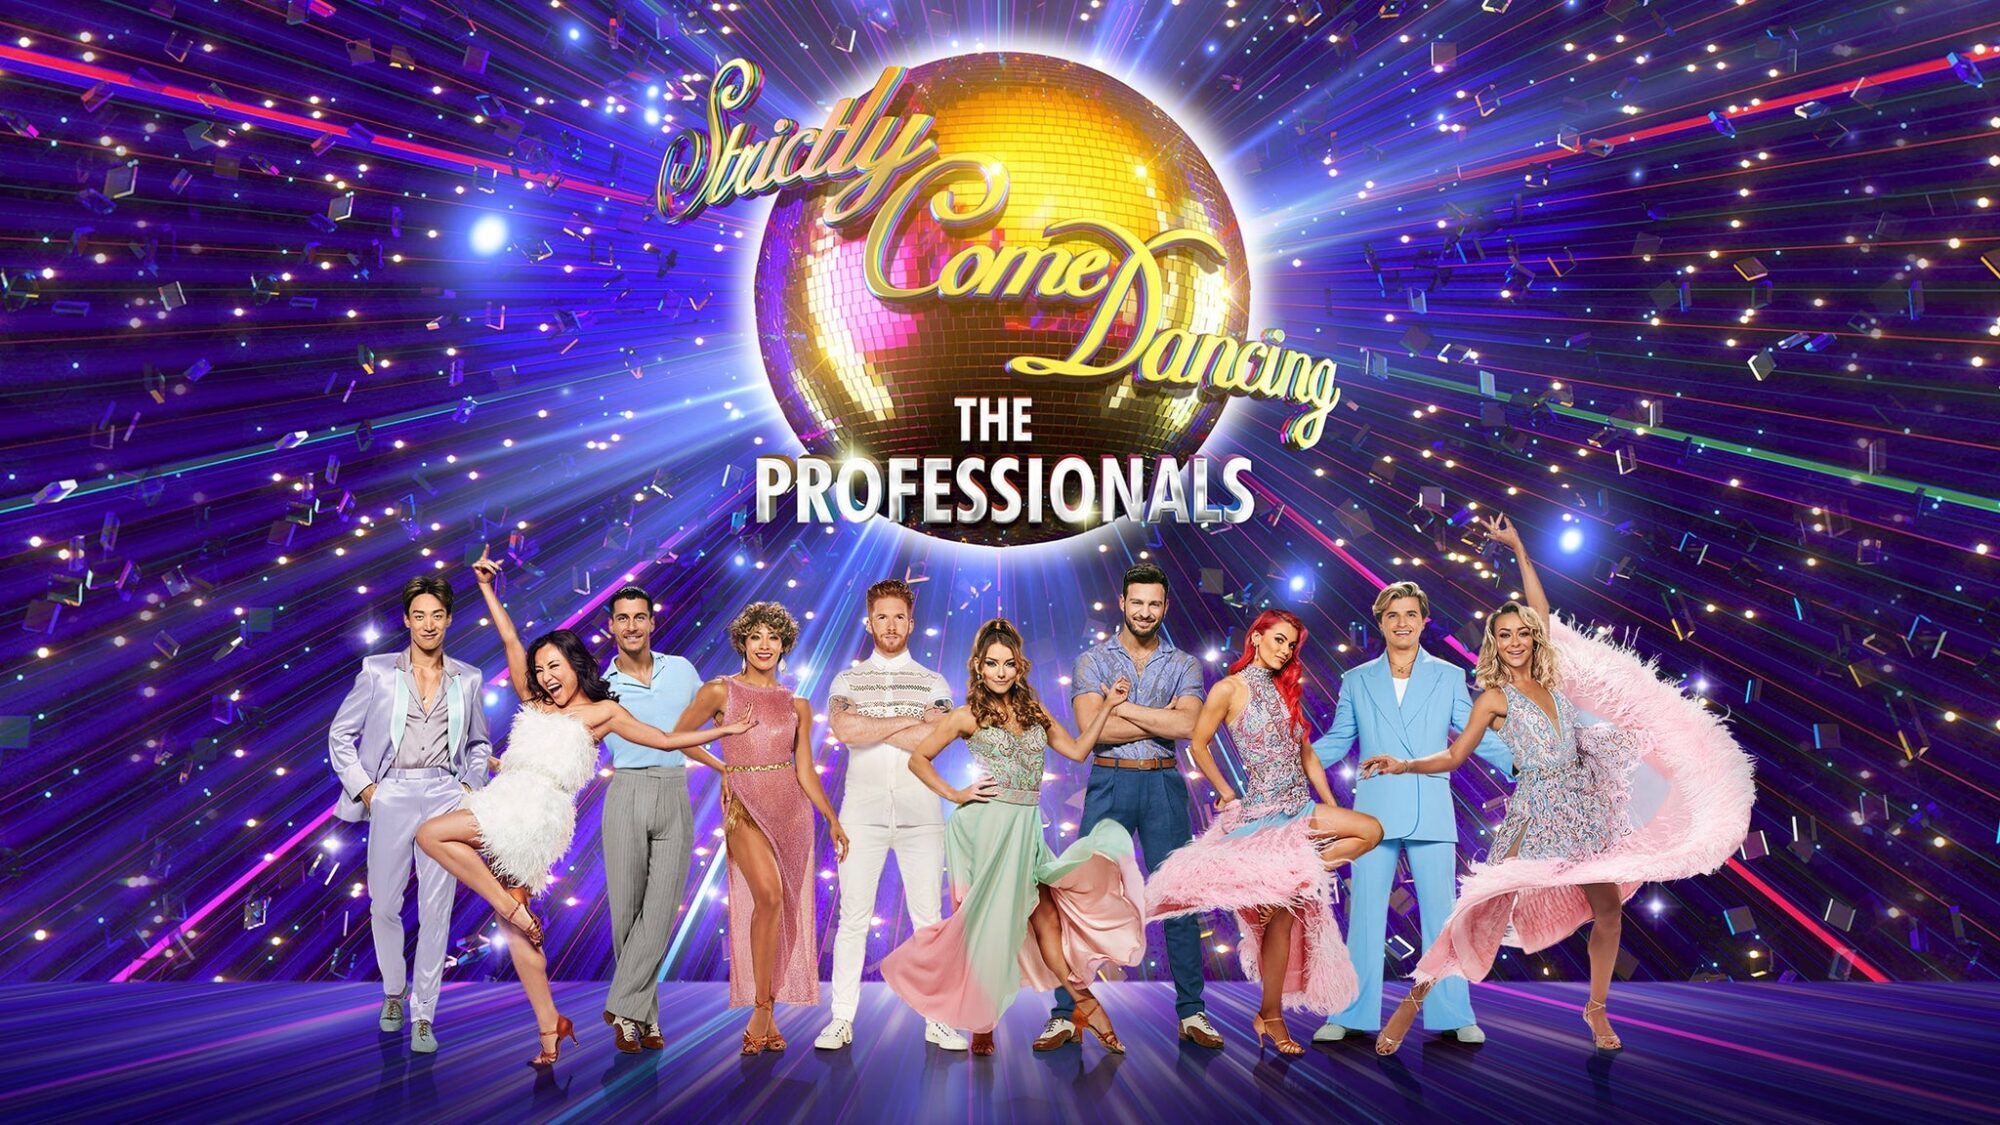 Image name Strictly Come Dancing the Professionals 2023 at Sheffield City Hall Oval Hall Sheffield the 1 image from the post Strictly Come Dancing the Professionals 2023 at York Barbican, York in Yorkshire.com.